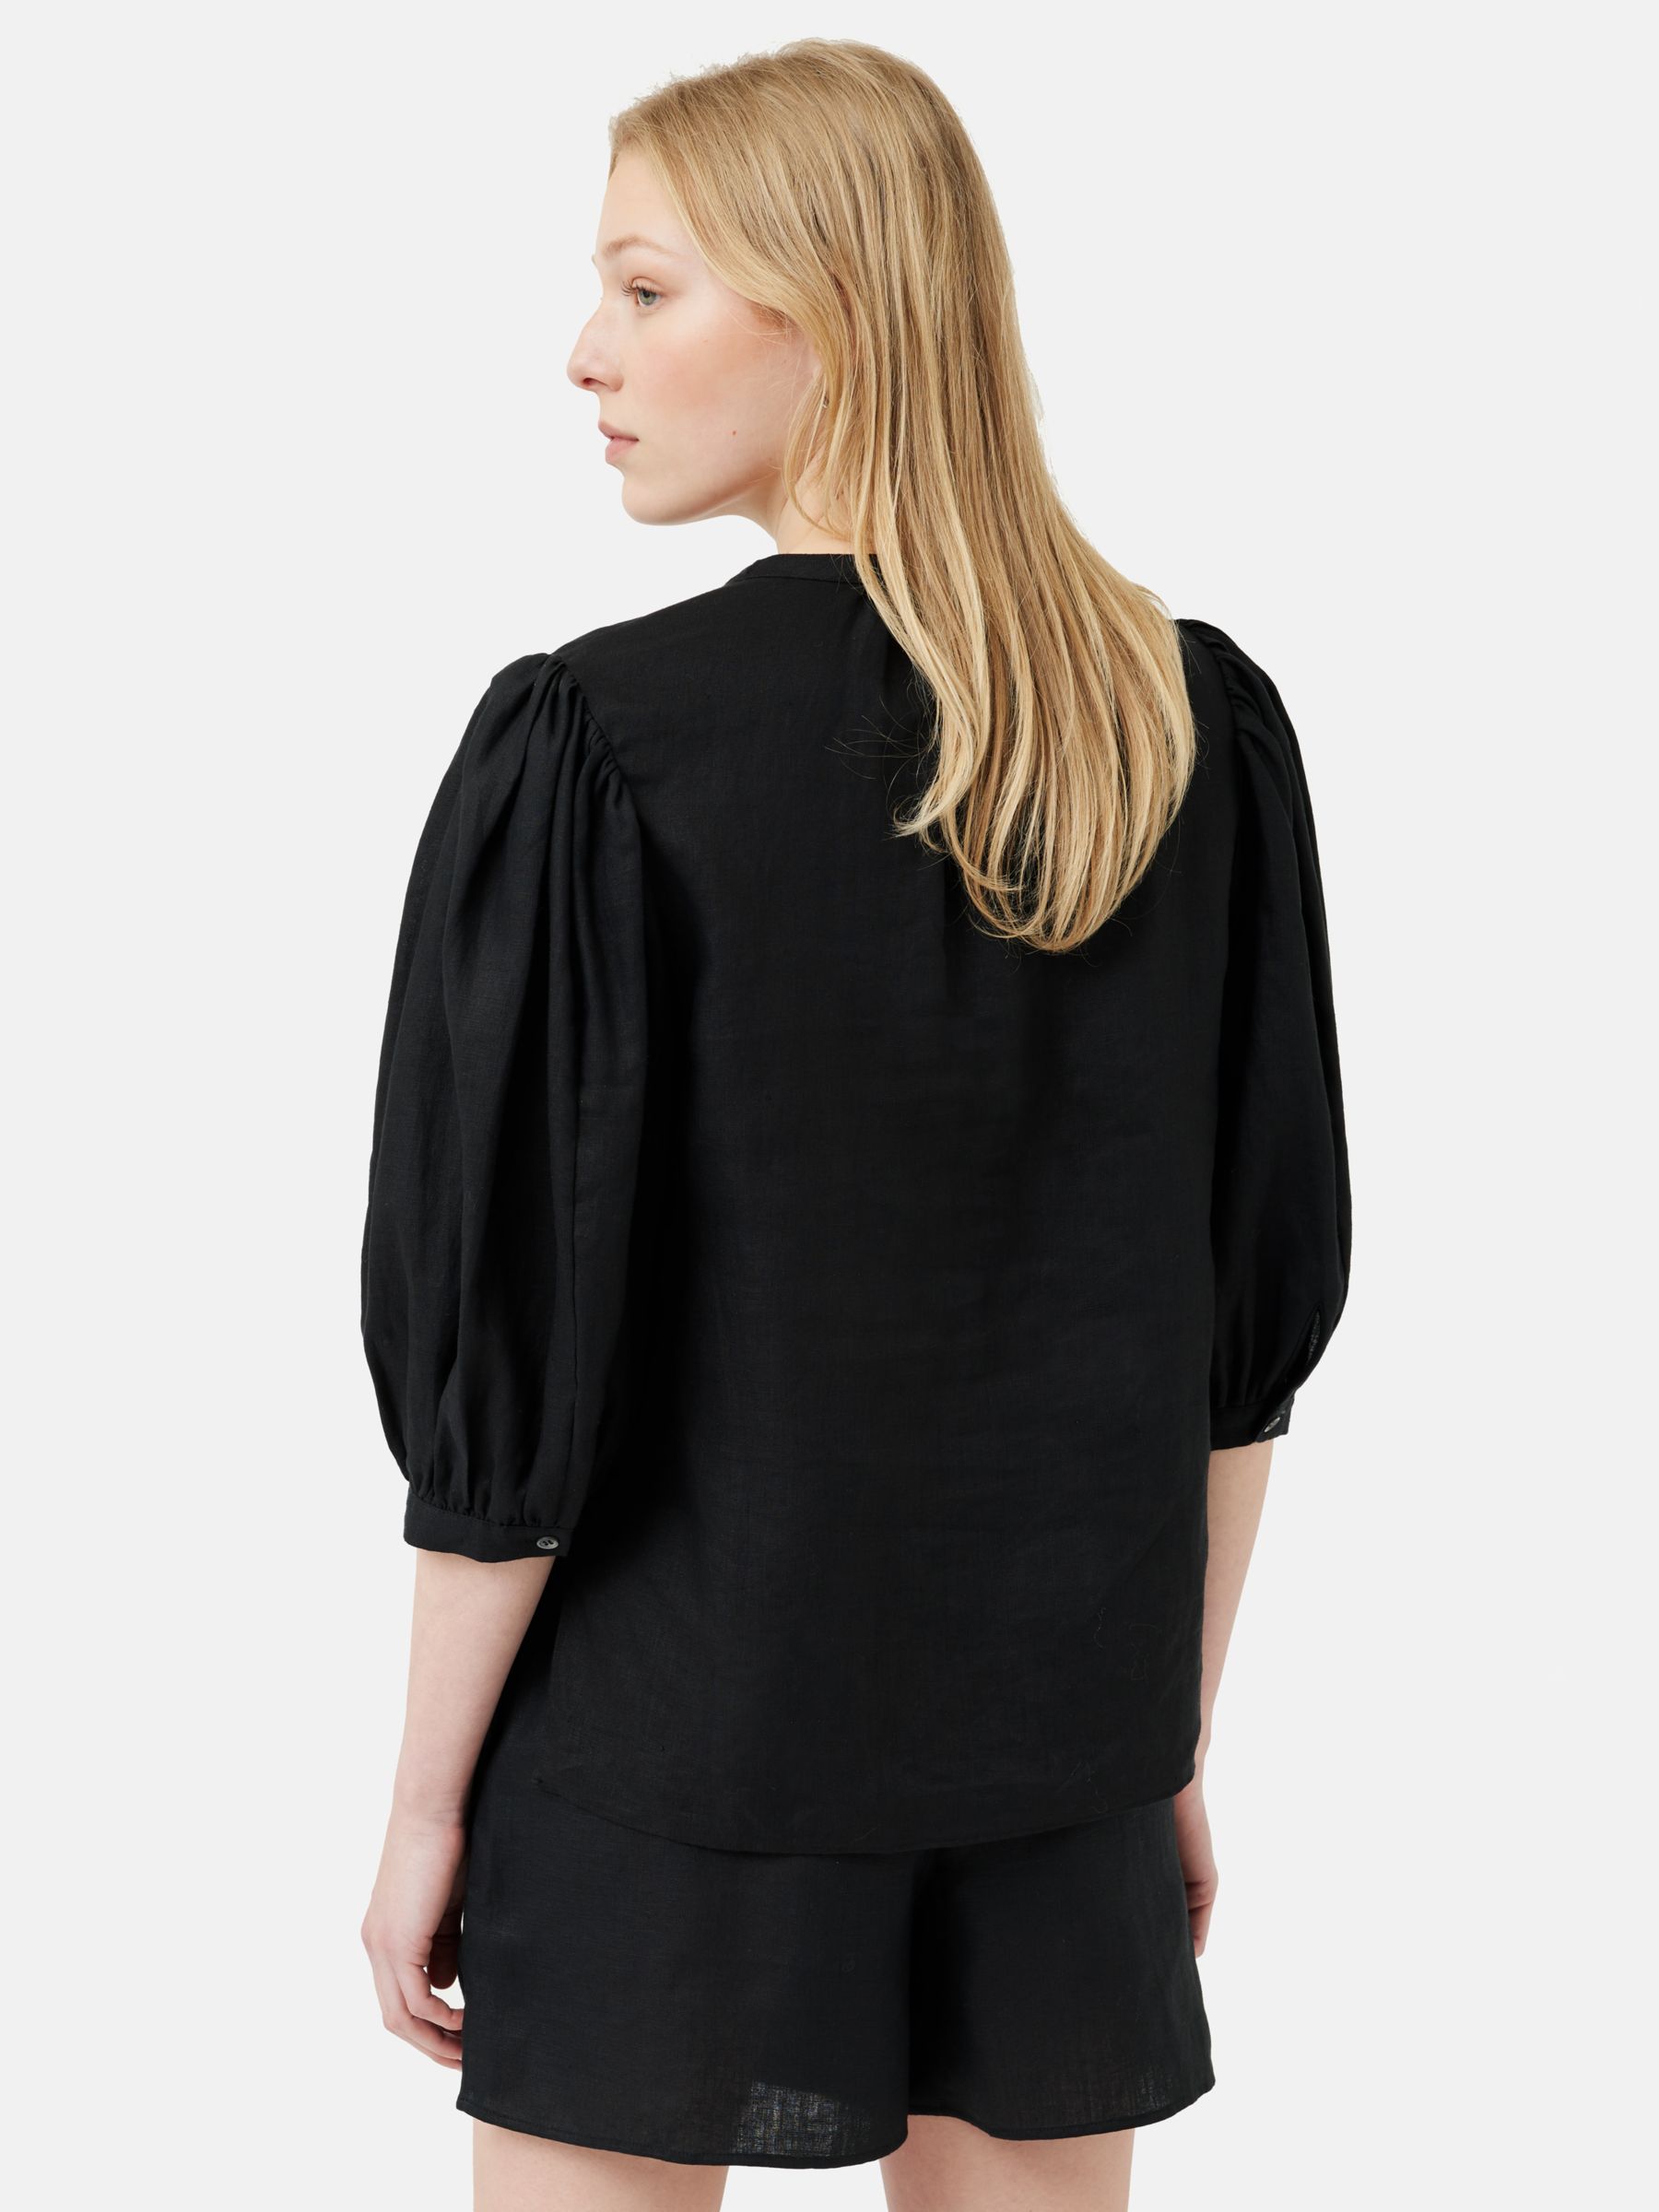 Jigsaw Linen Cicelly Cuffed Tunic Top, Black at John Lewis & Partners